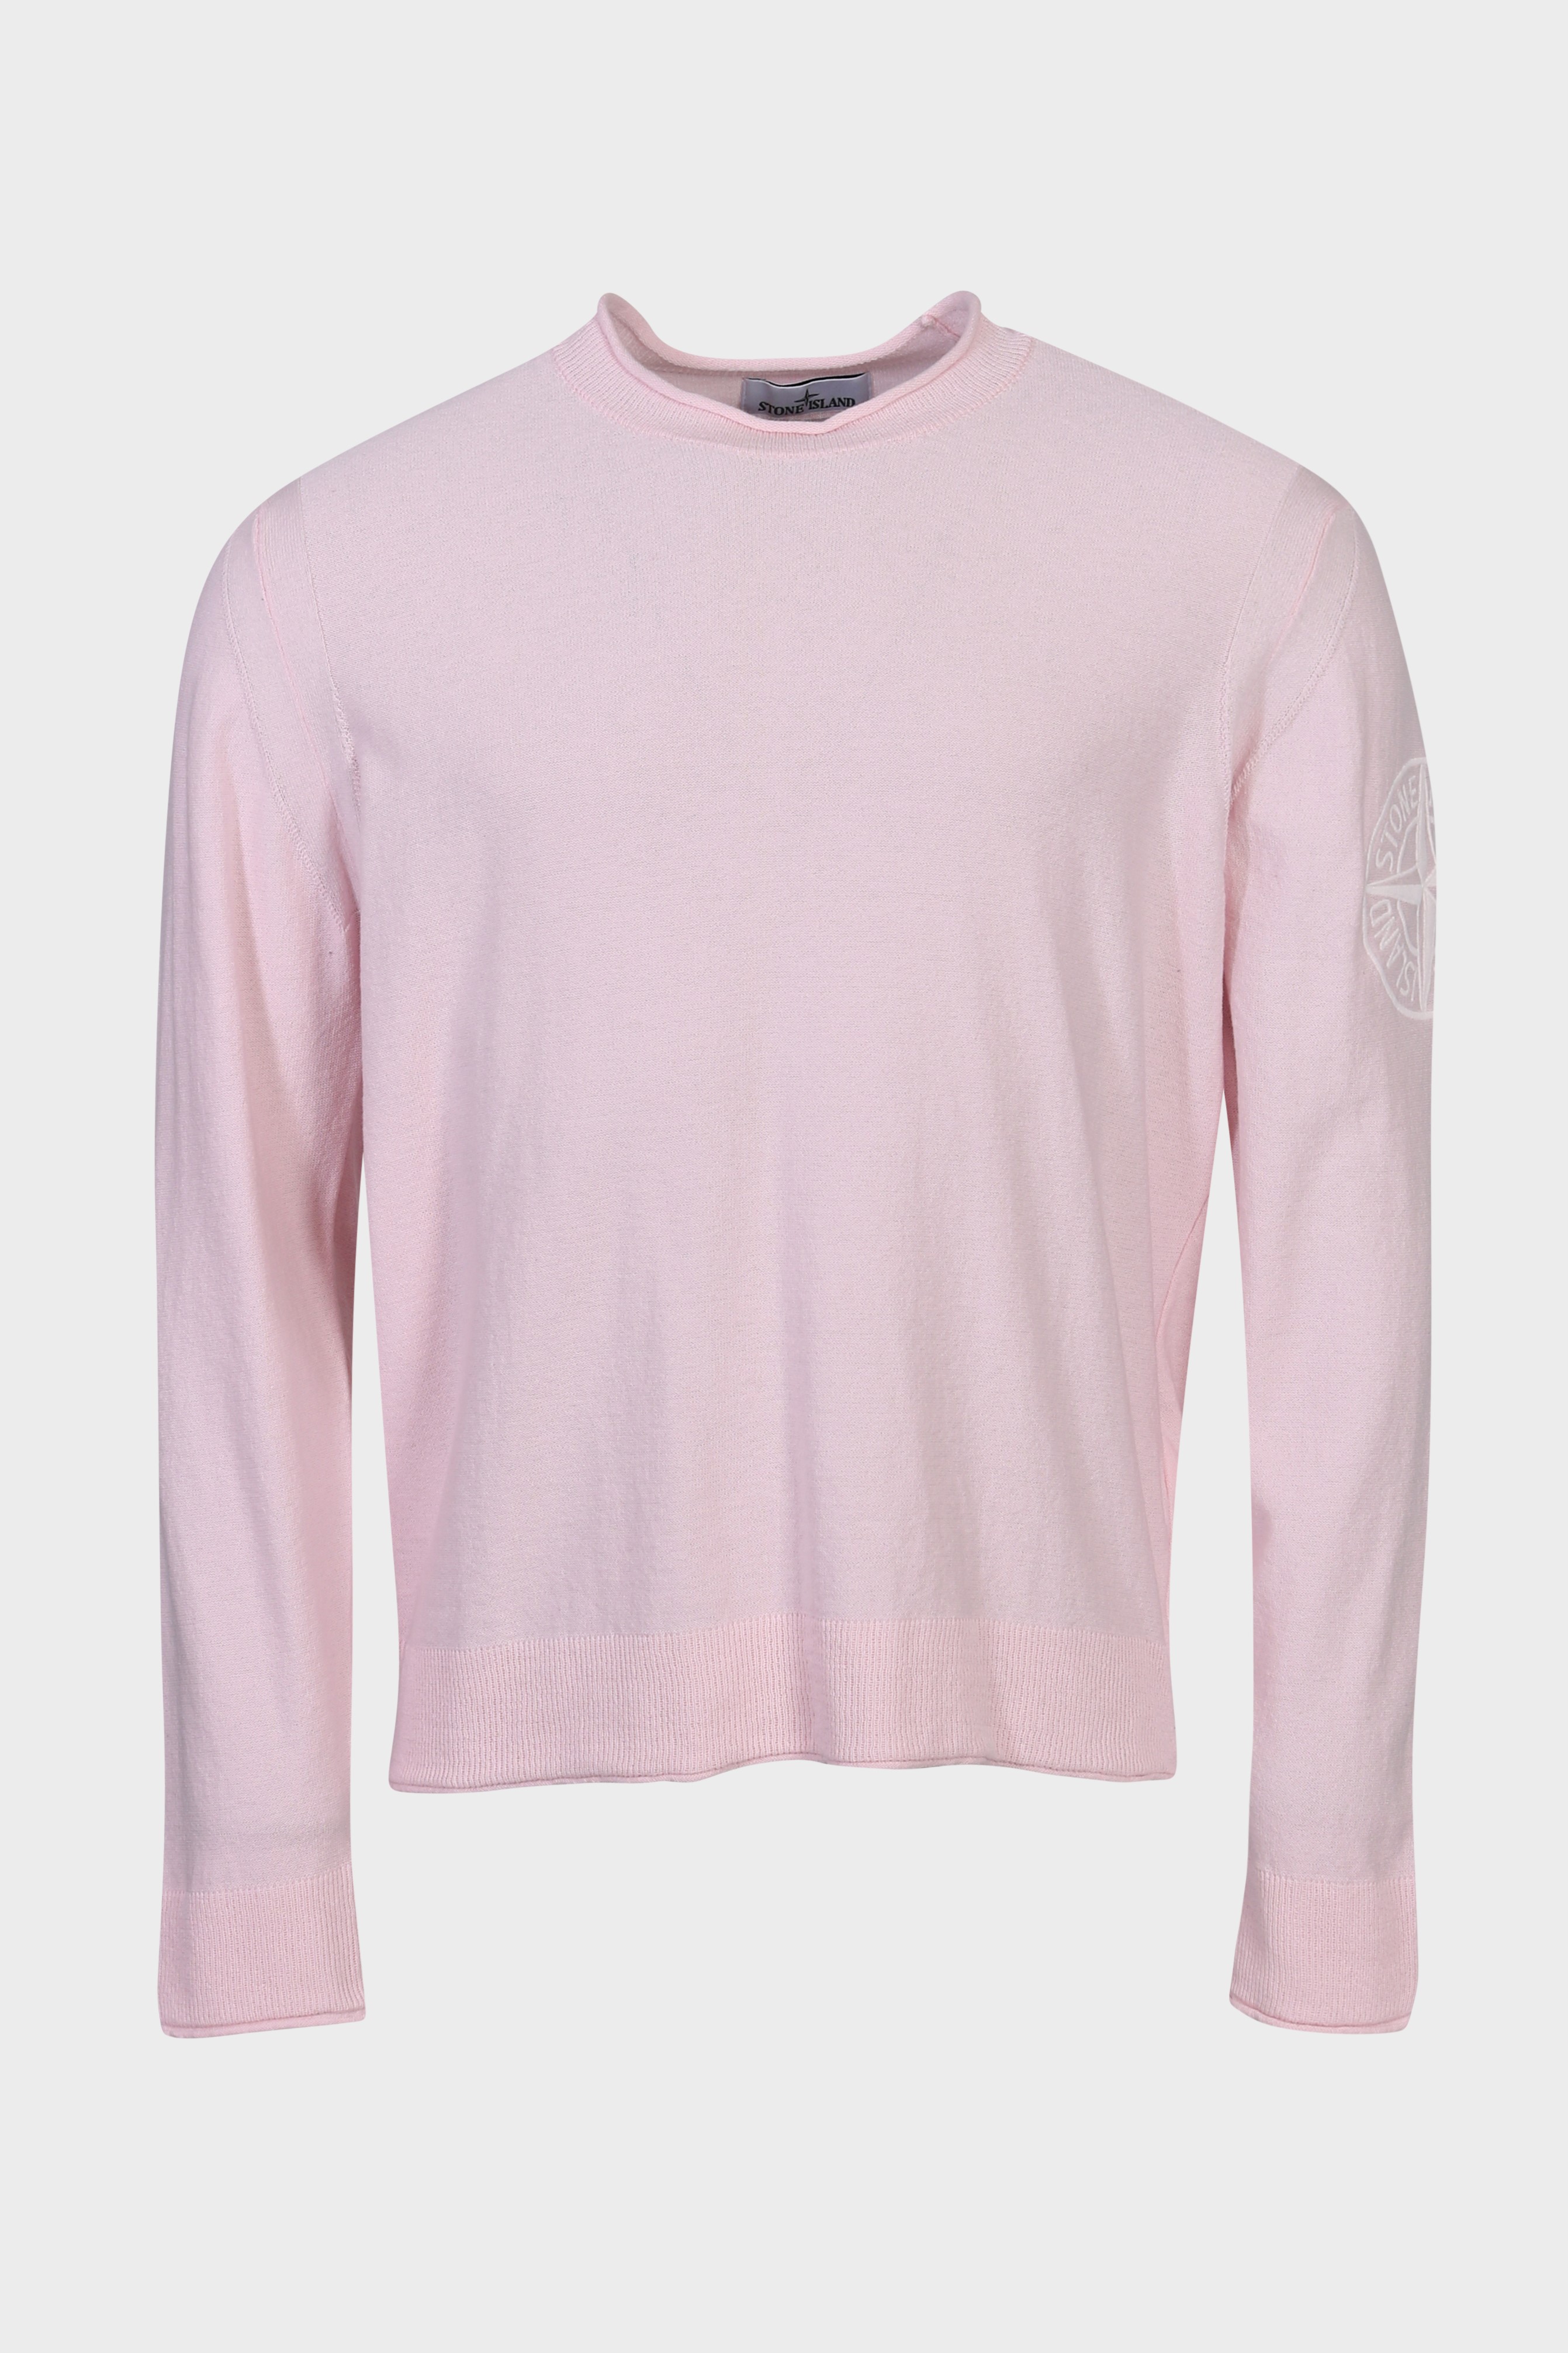 STONE ISLAND Cotton Knit Pullover in Light Pink M